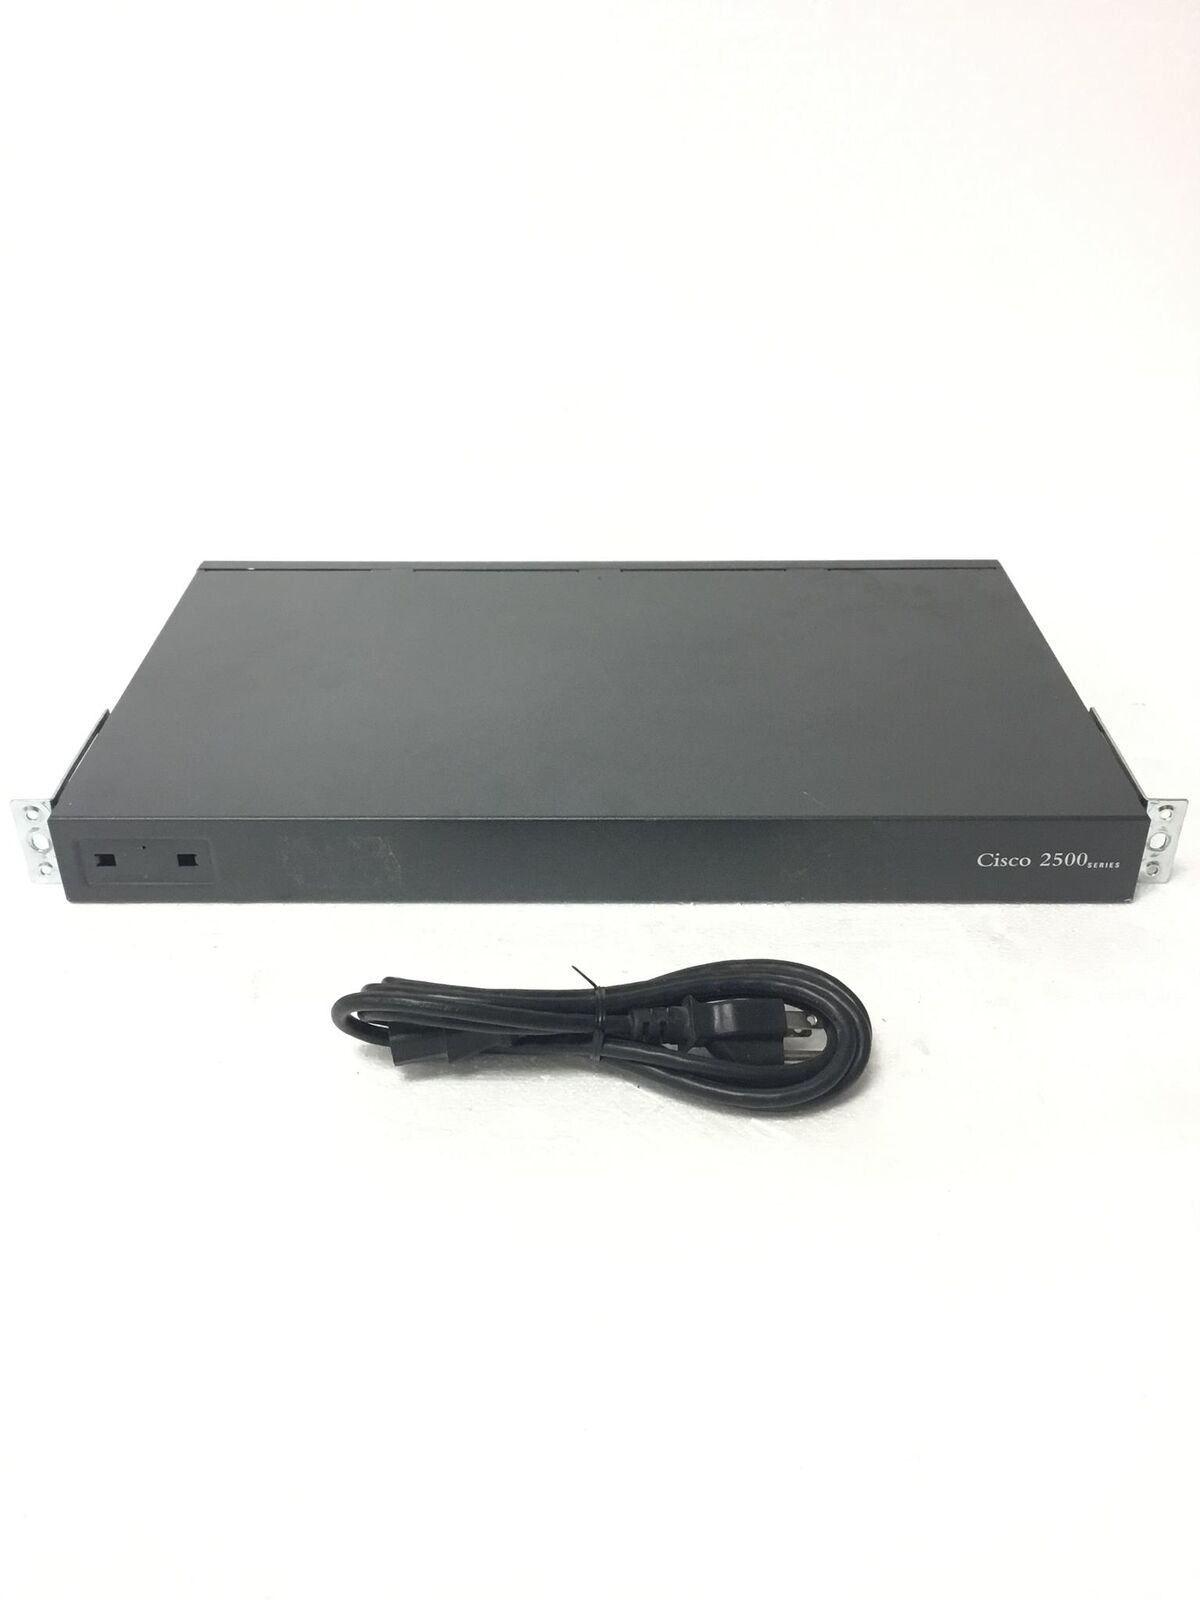 CISCO 2500 2514 Integrated Services Router with Rackmount Ears WORKING 